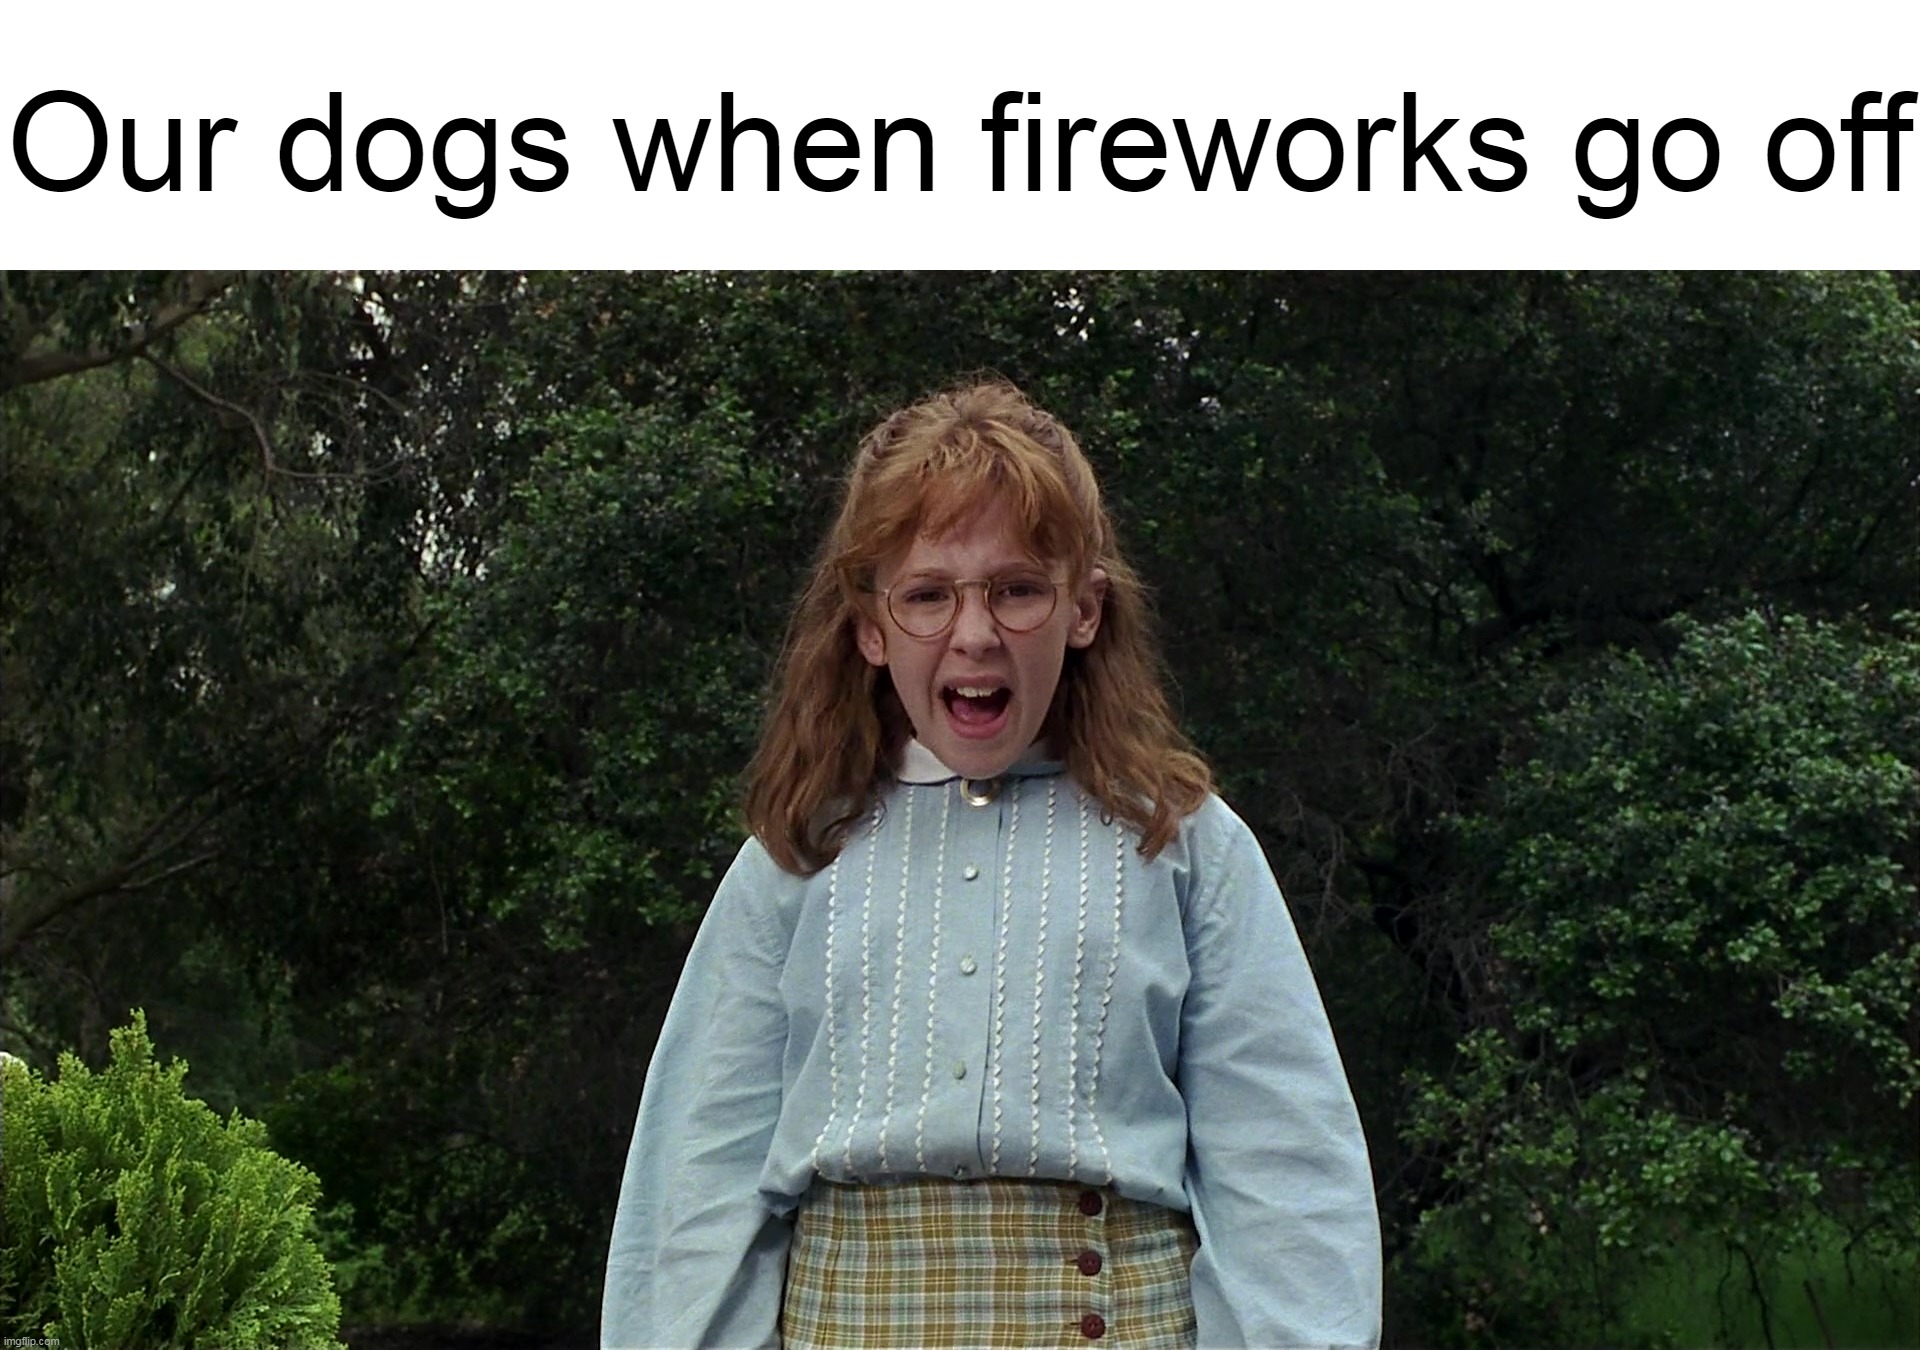 Our dogs when fireworks go off | image tagged in meme,memes,humor,dogs,relatable,fireworks | made w/ Imgflip meme maker